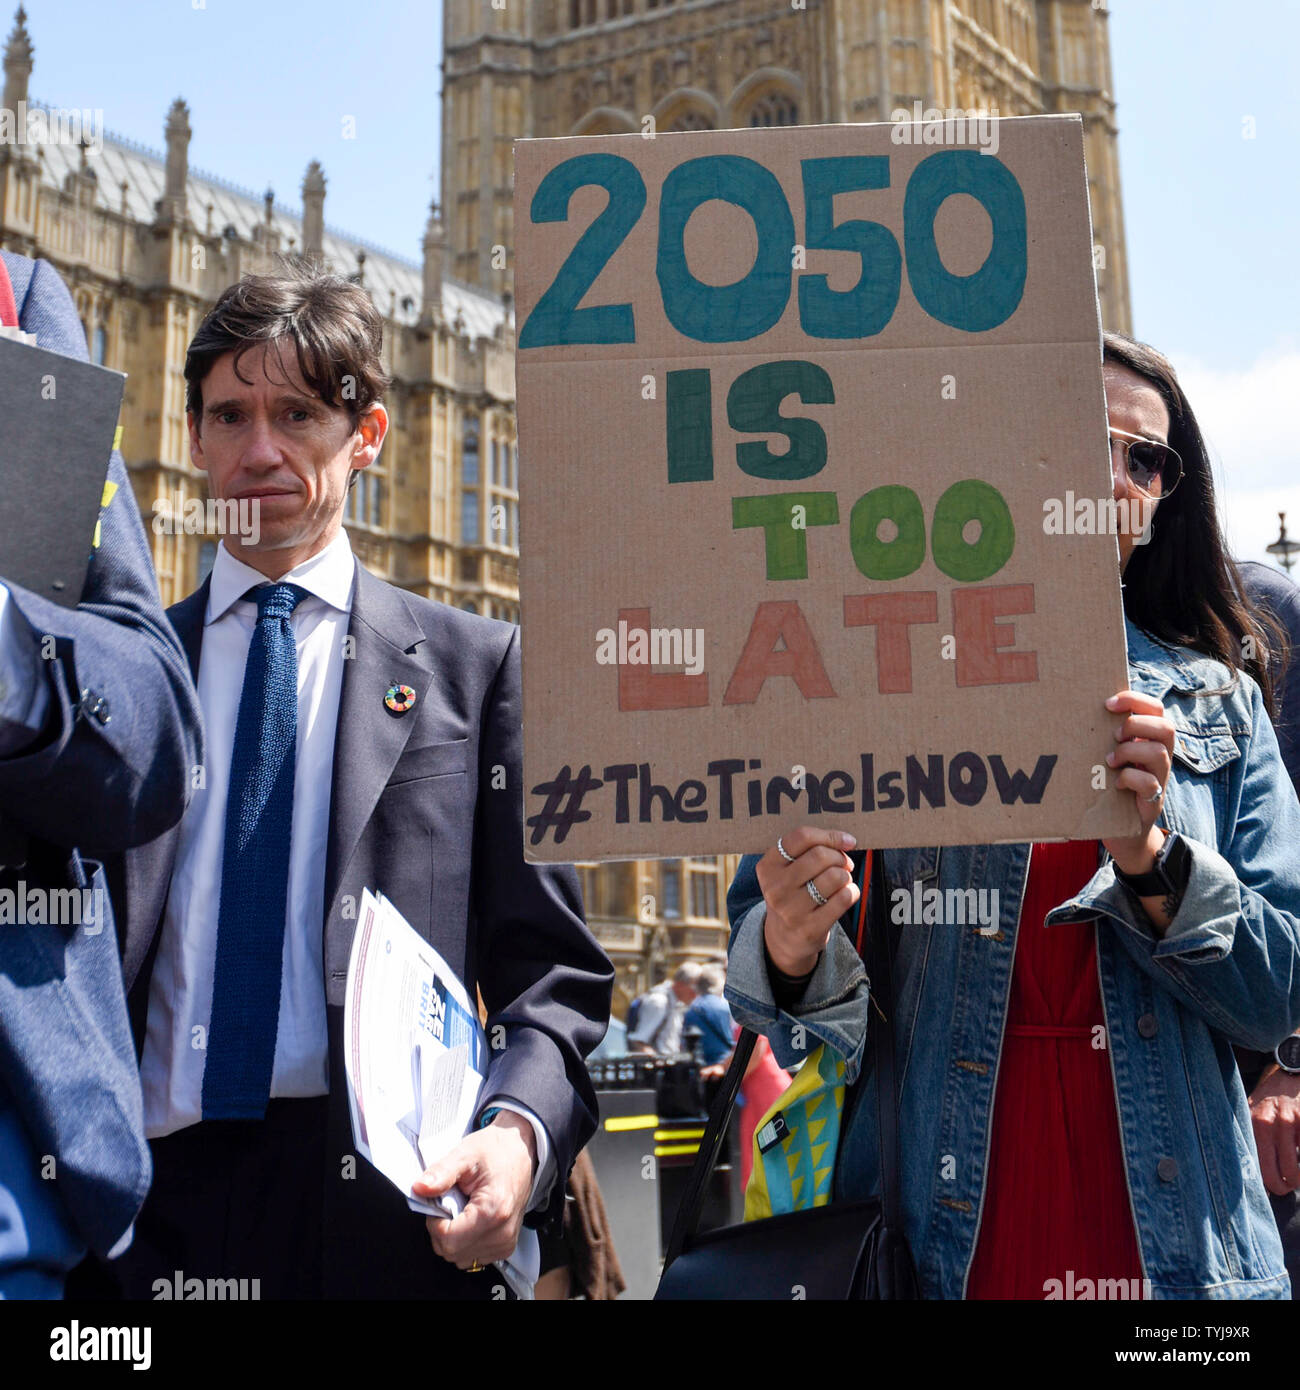 London, UK.  26 June 2019. Rory Stewart, Secretary of State for International Development, and MP for Penrith and The Border, passes a woman holding up as sign during the 'Time Is Now' mass lobby around Parliament.  Activists are attempting to deliver a message to MPs that to tackle the environmental crisis, a strong Environment Bill is passed that can restore nature, cut plastic pollution and improve air quality.  Similar gatherings are taking place across the UK.  Credit: Stephen Chung / Alamy Live News Stock Photo